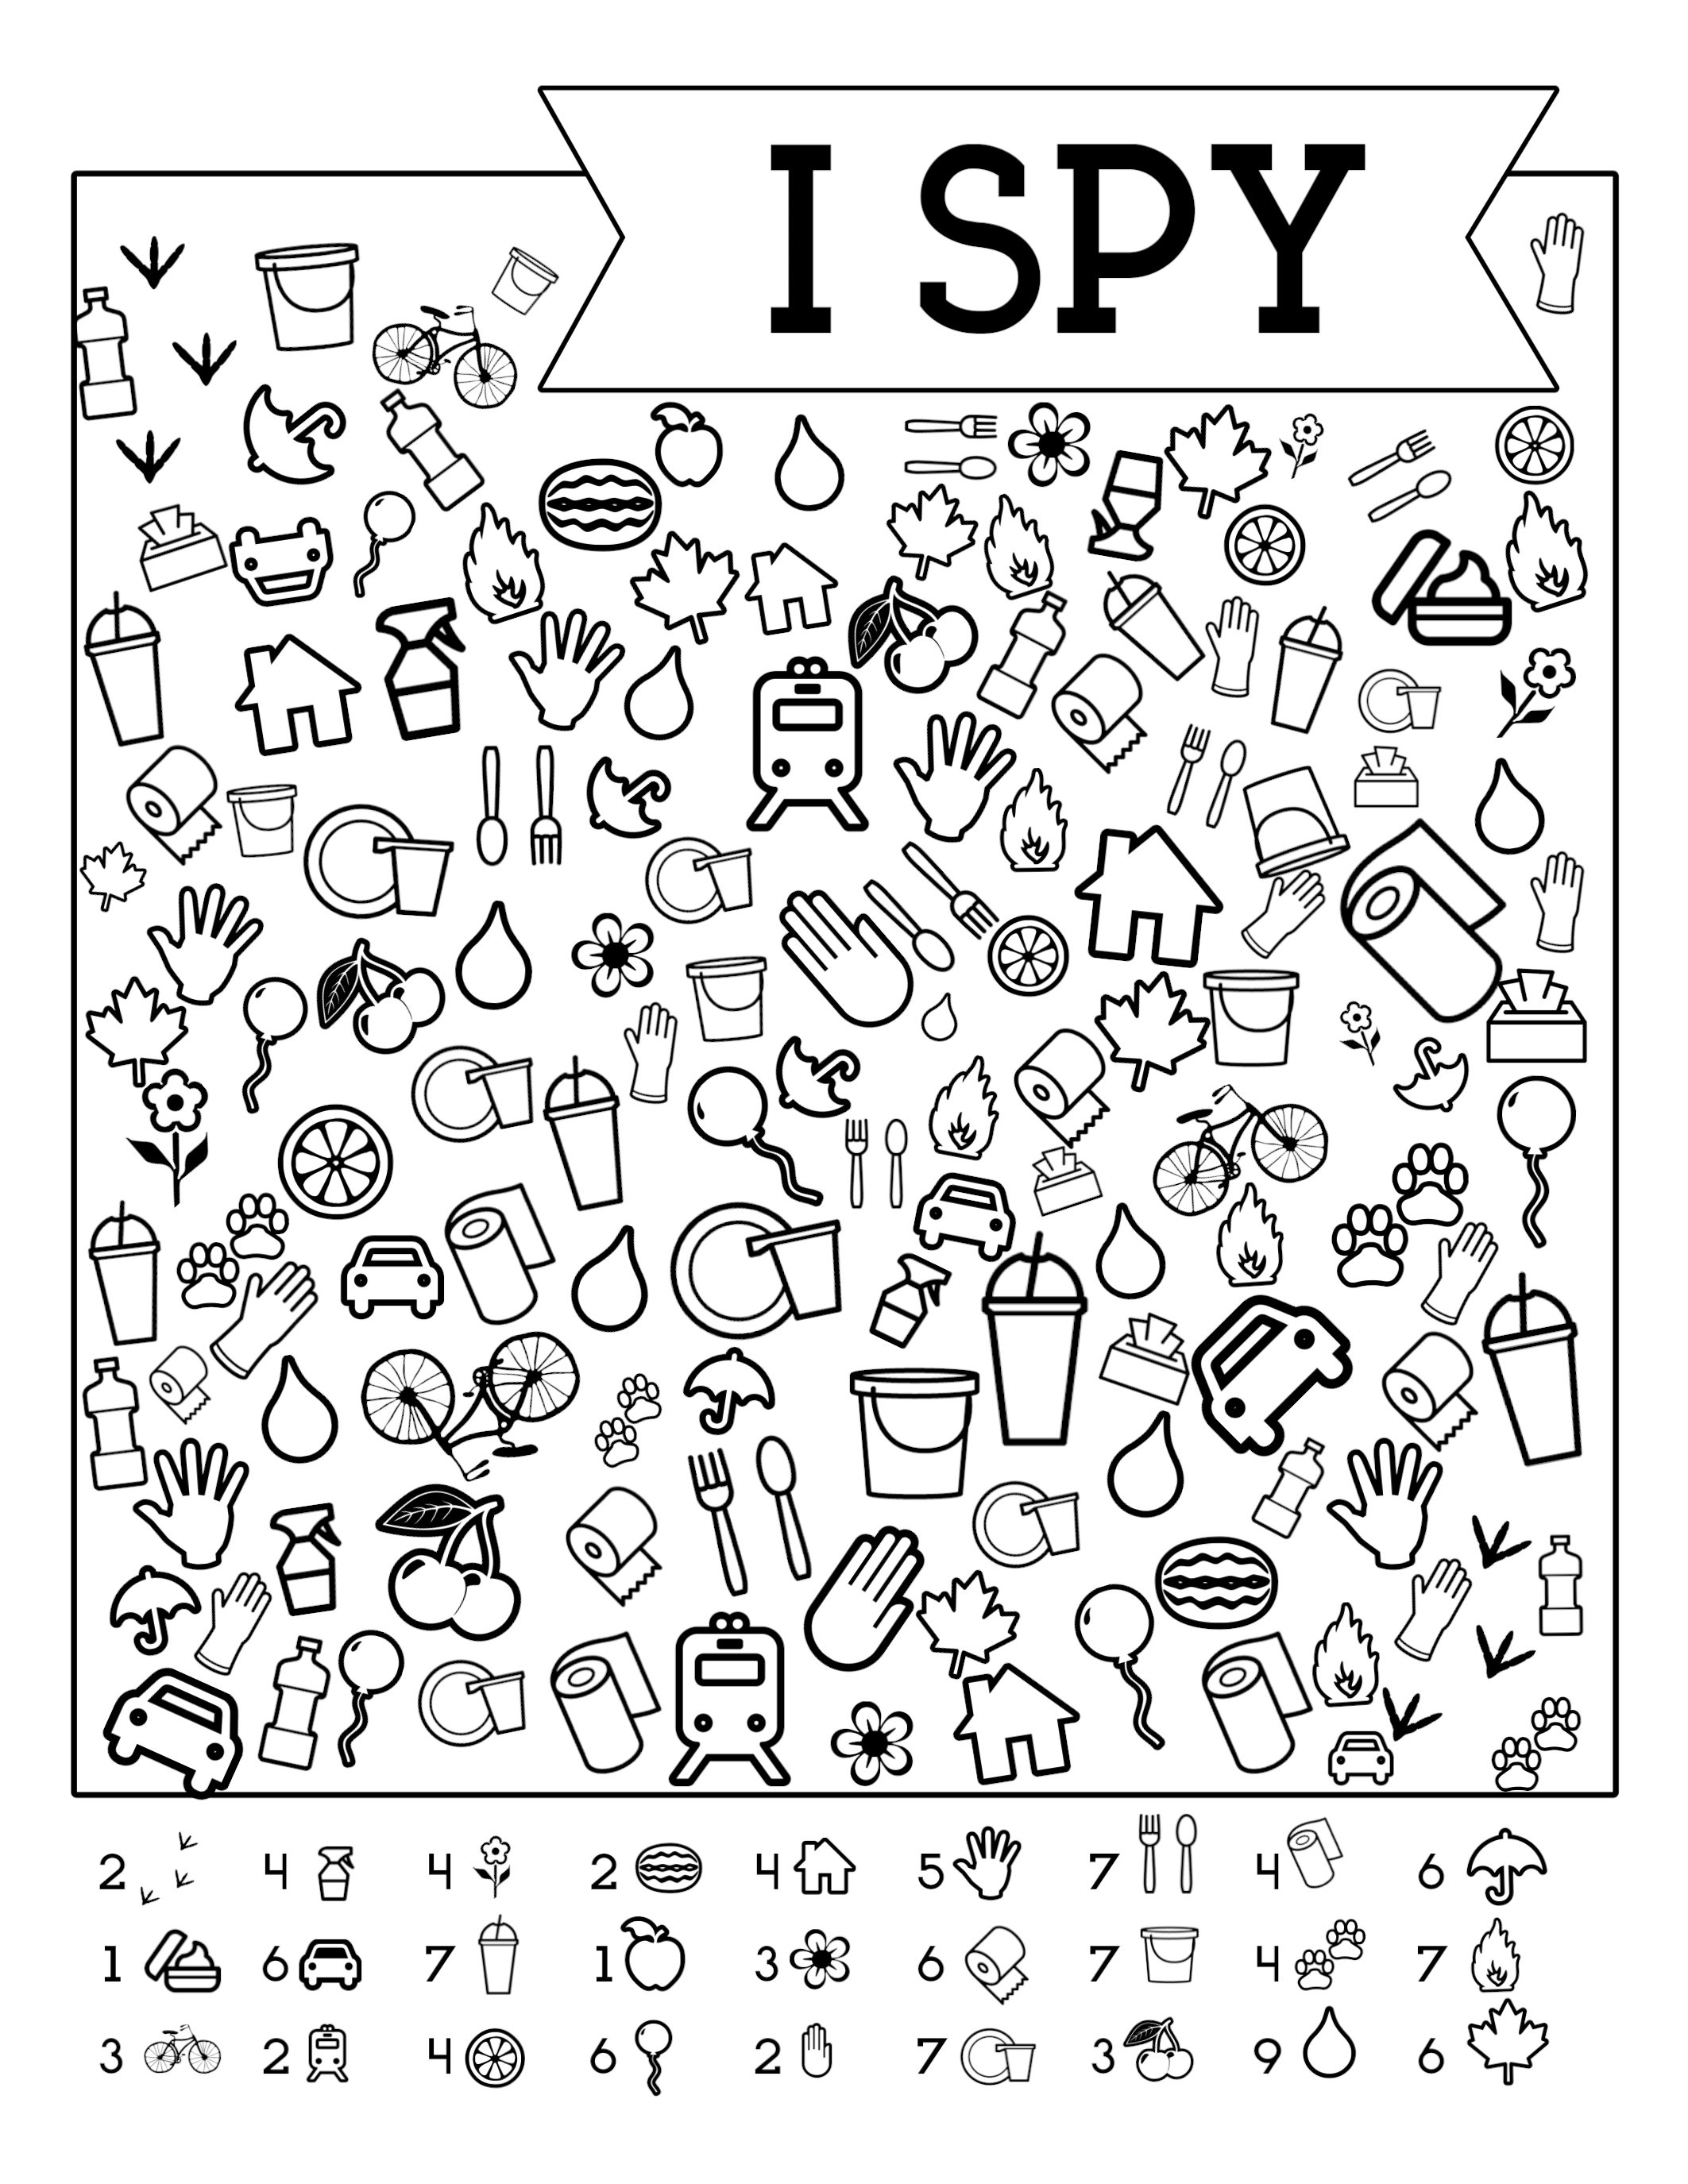 fun-autumn-themed-i-spy-printable-for-kids-count-find-and-color-in-to-a-english-activities